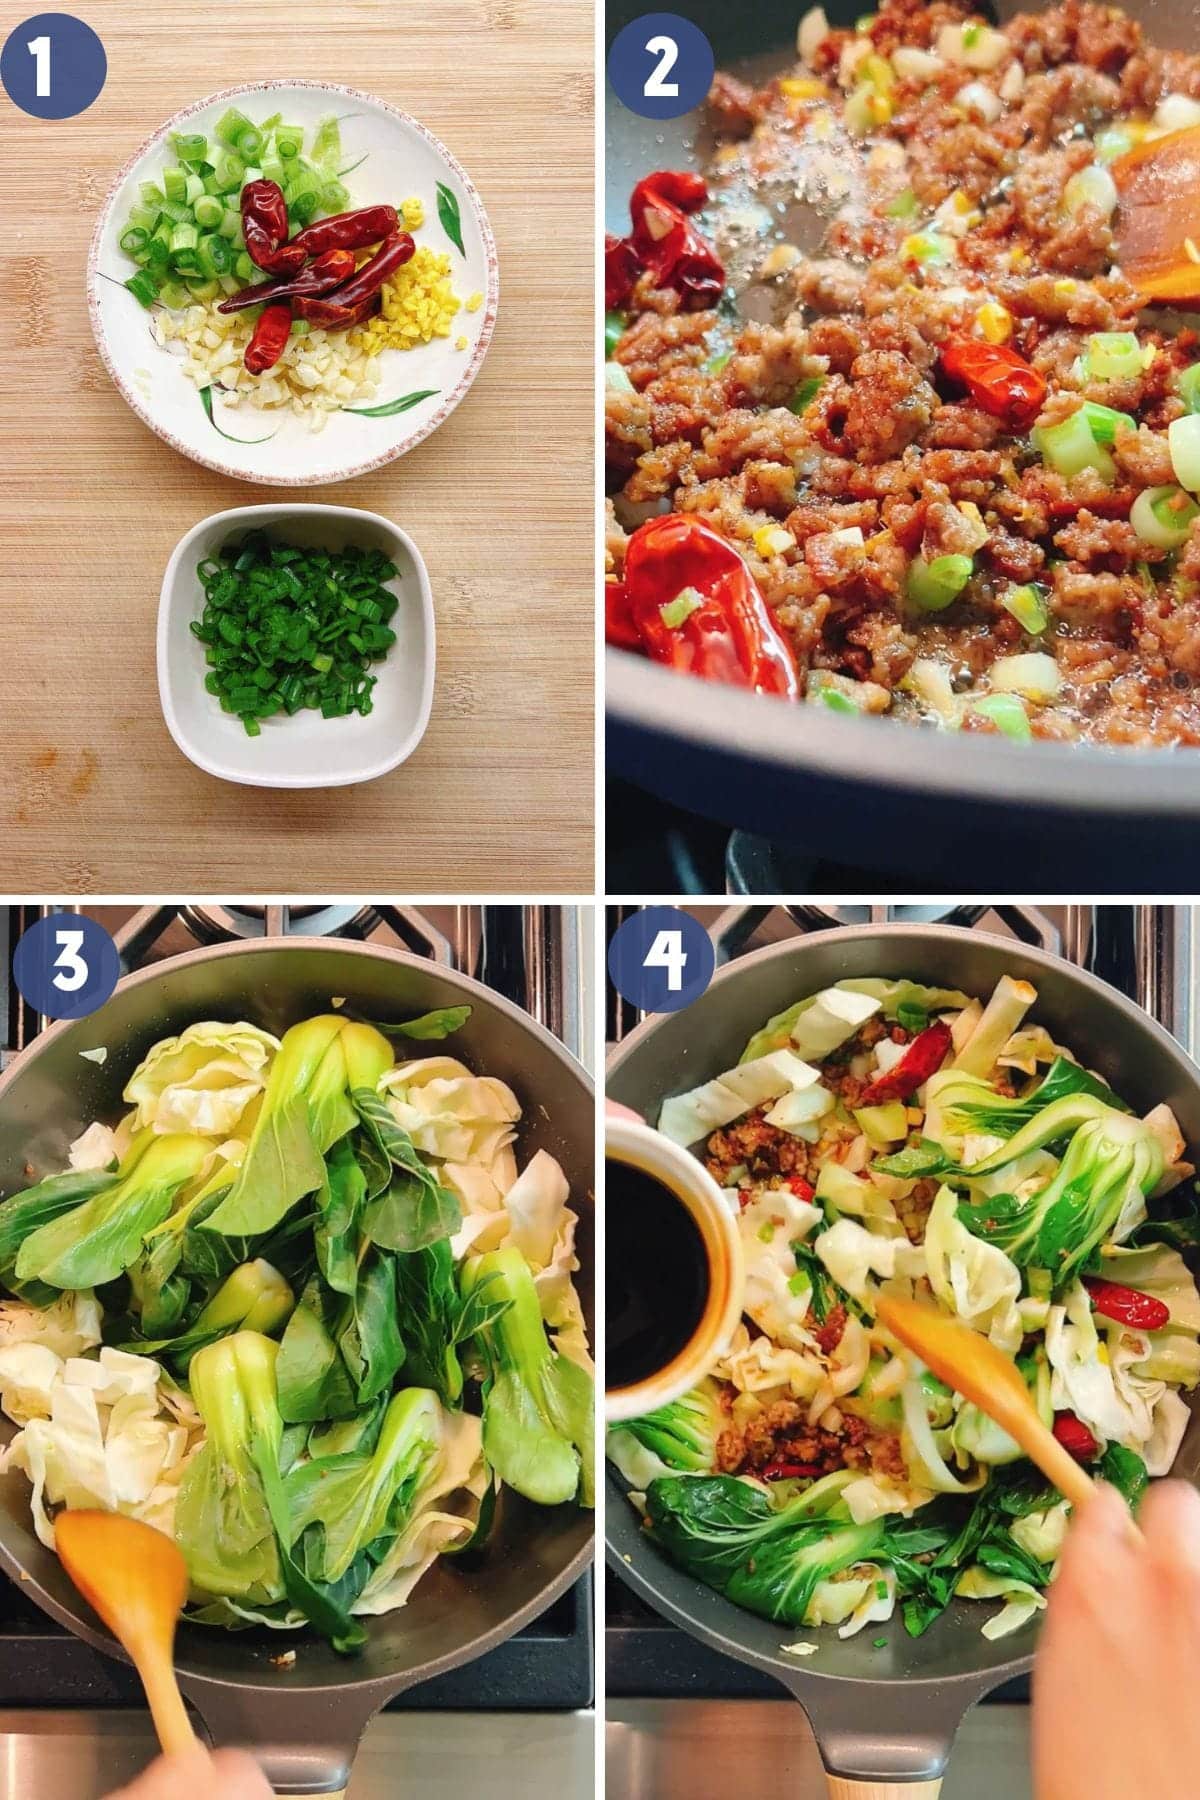 Person demos how to make ground pork stir fry with cabbage and bok choy.